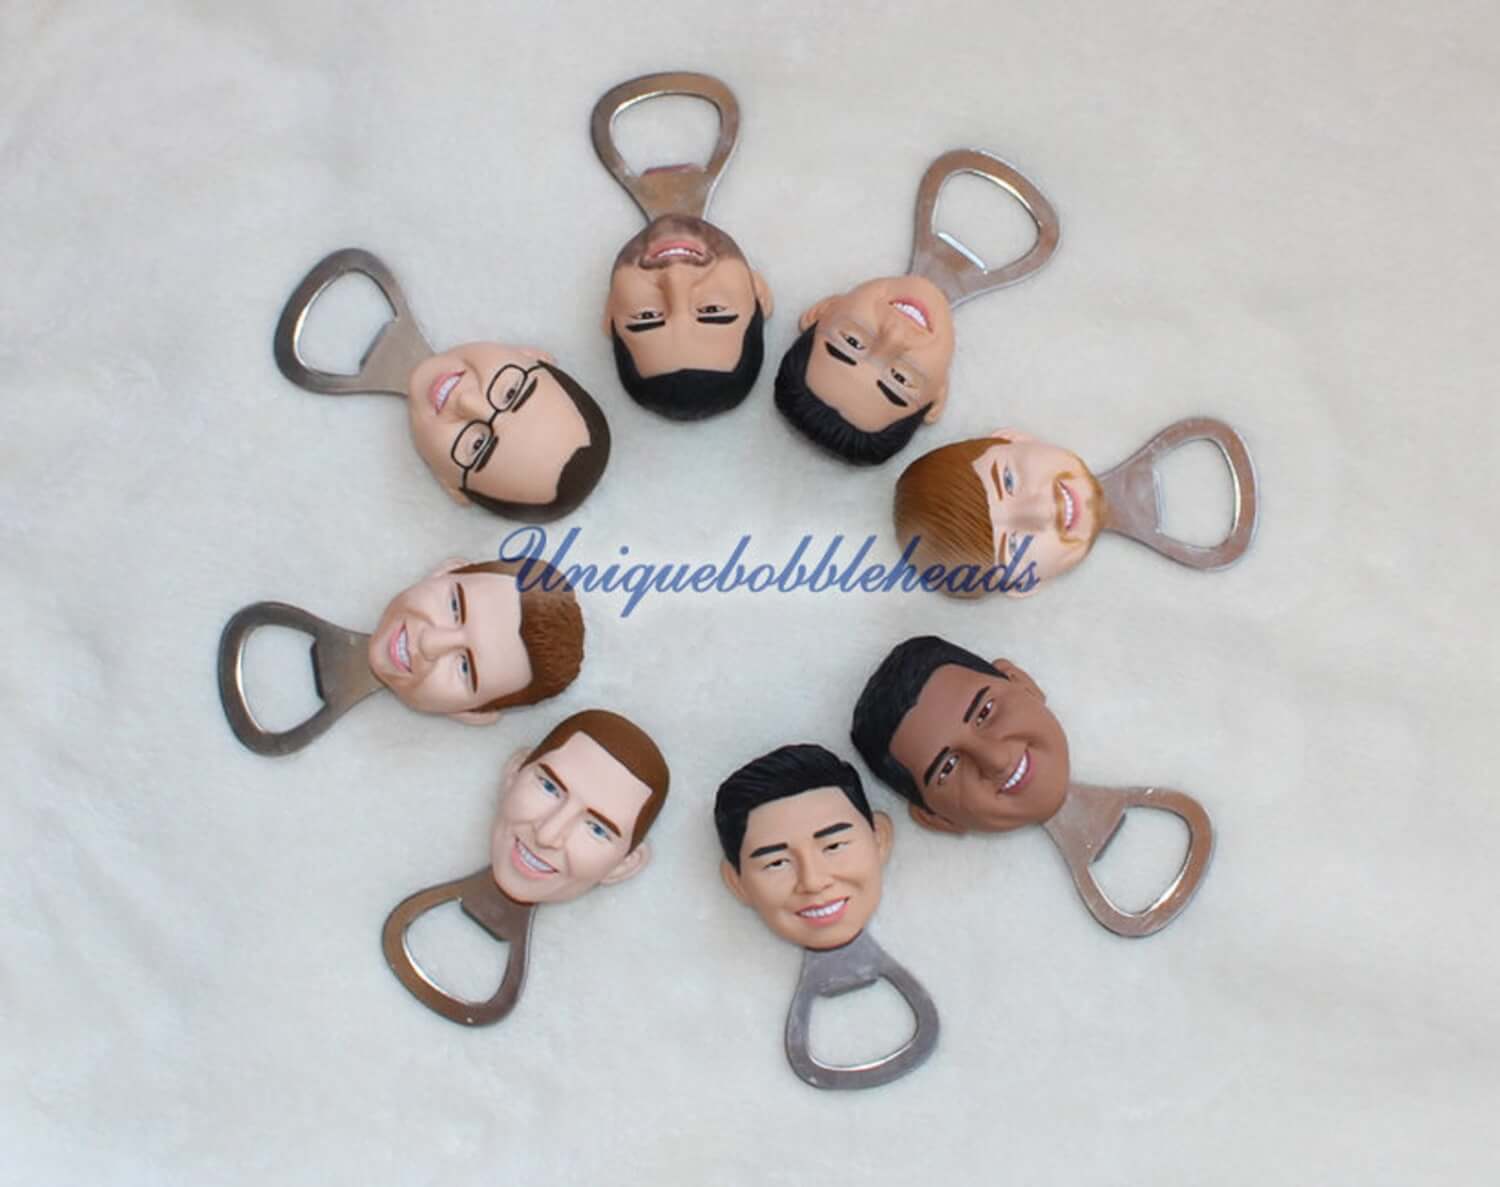 These Epic Customized Face Bottle Openers